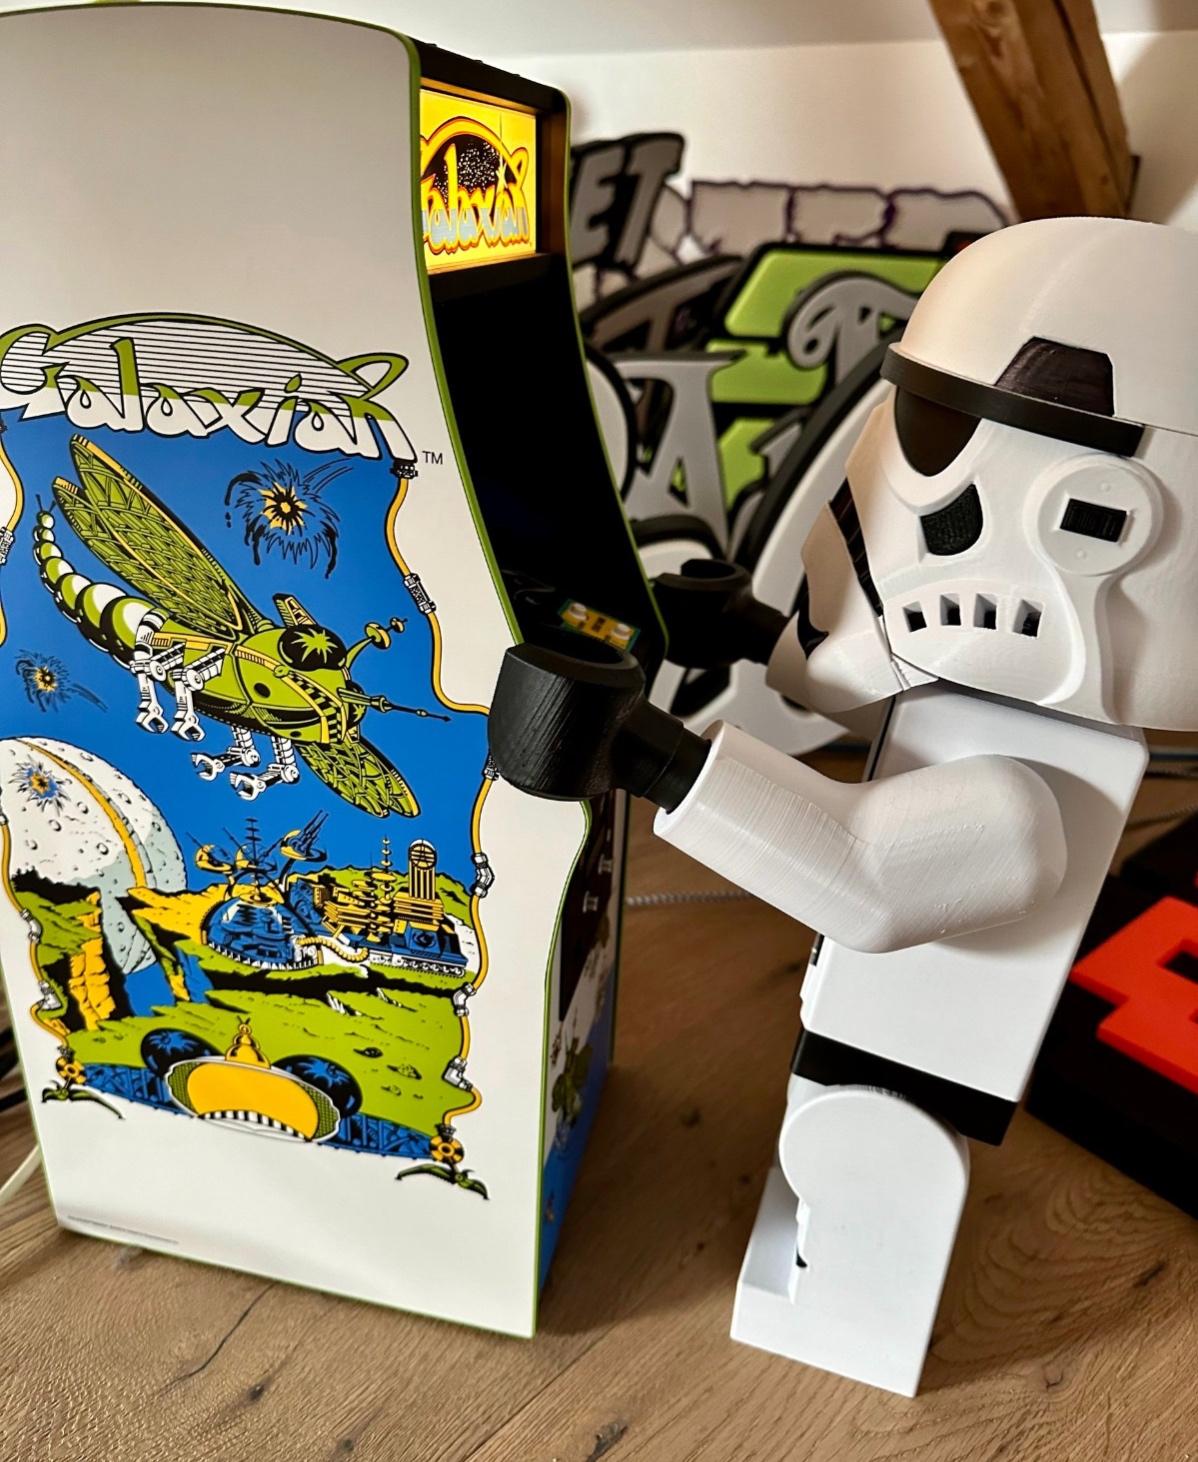 Stormtrooper (6:1 LEGO-inspired brick figure, NO MMU/AMS, NO supports, NO glue) - Thanks a lot for this fantastic model. Printed at 180%, and now he can play my "Galaxian" 1:4 Arcade Cabinet :-)) Cheers - 3d model